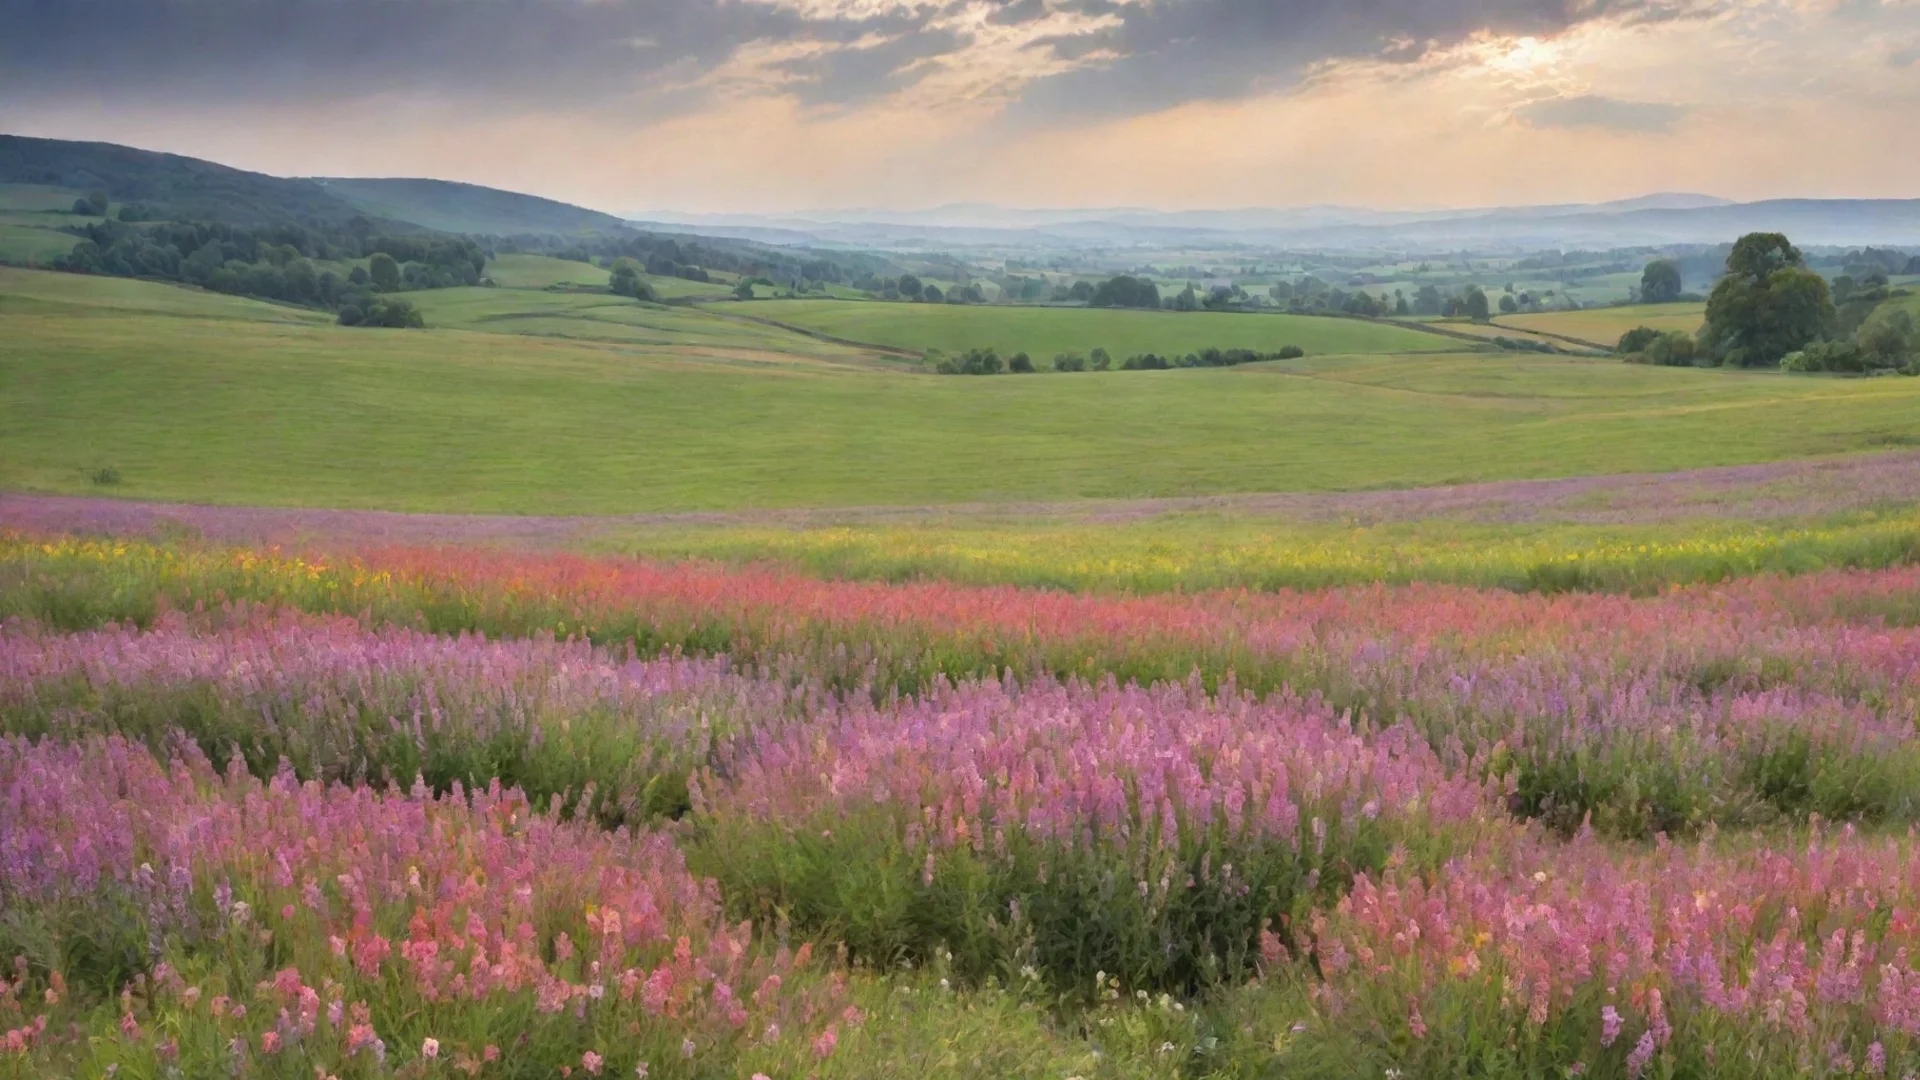 aisweeping landscape fields of flowers peaceful relaxing wide